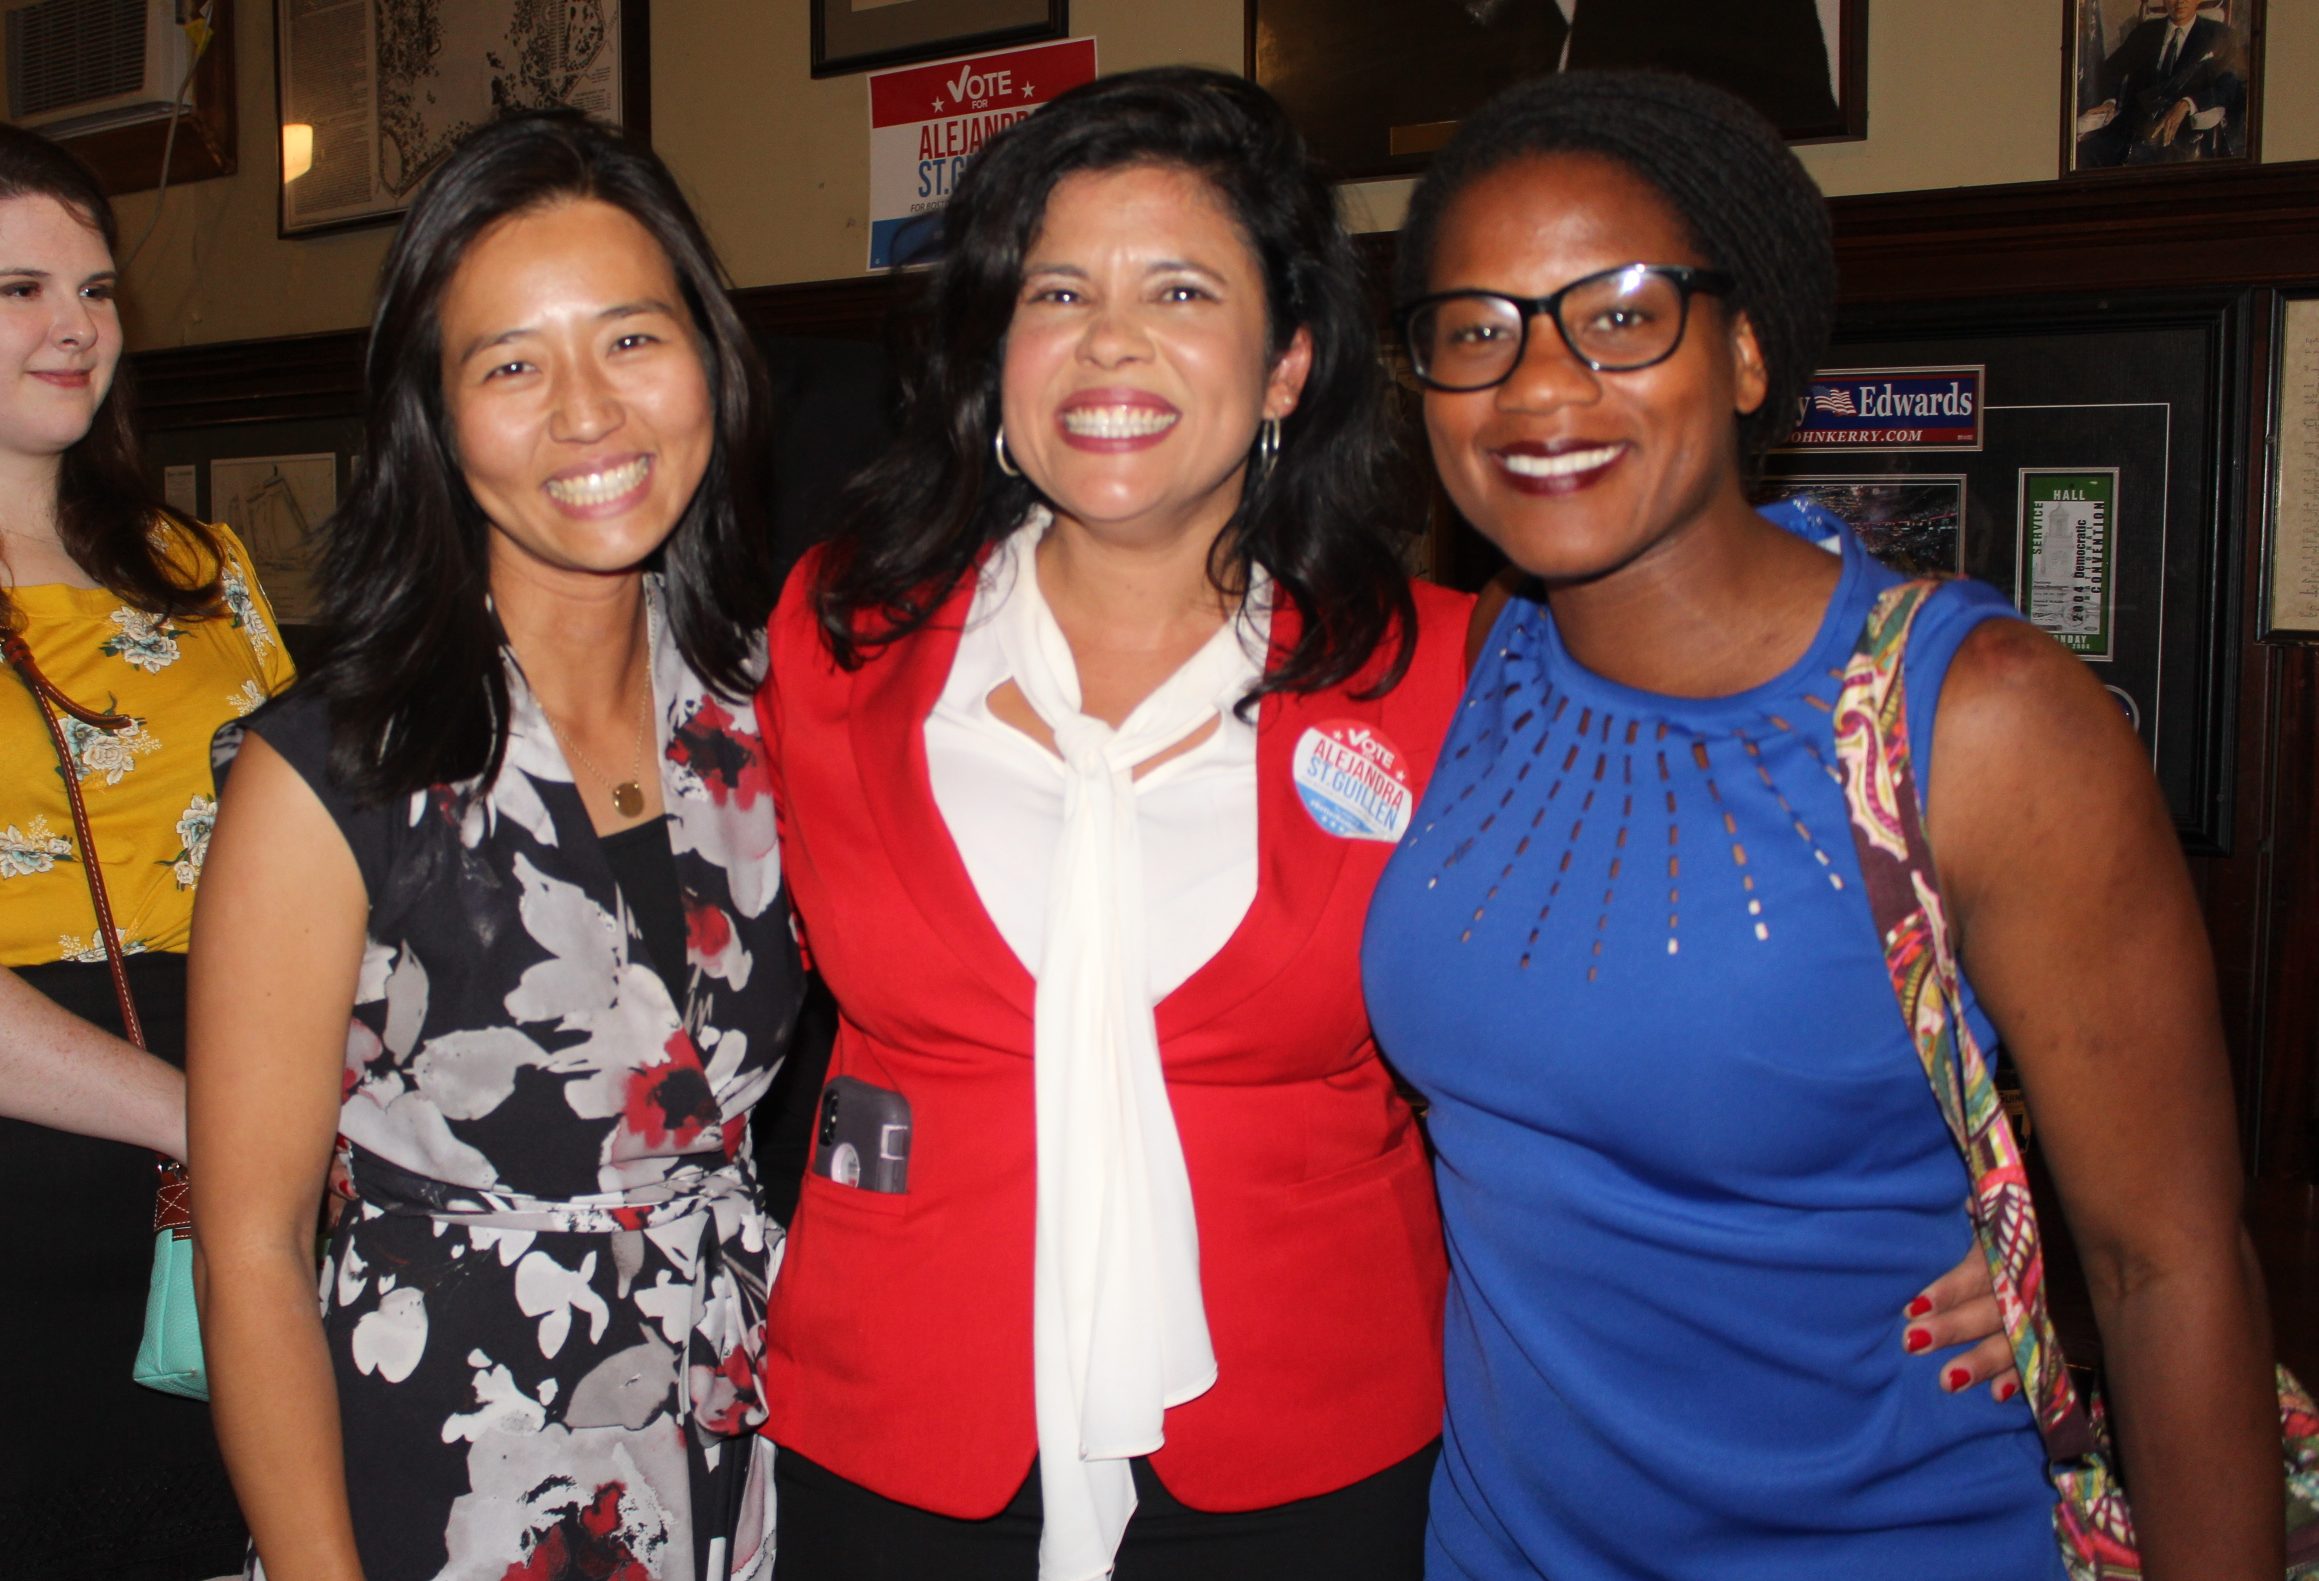 Alejandra St. Guillen (center) at her post-election party with fellow candidates Michelle Wu (left) and councilor Lydia Edwards (right). Photo by Alexa Gagosz.